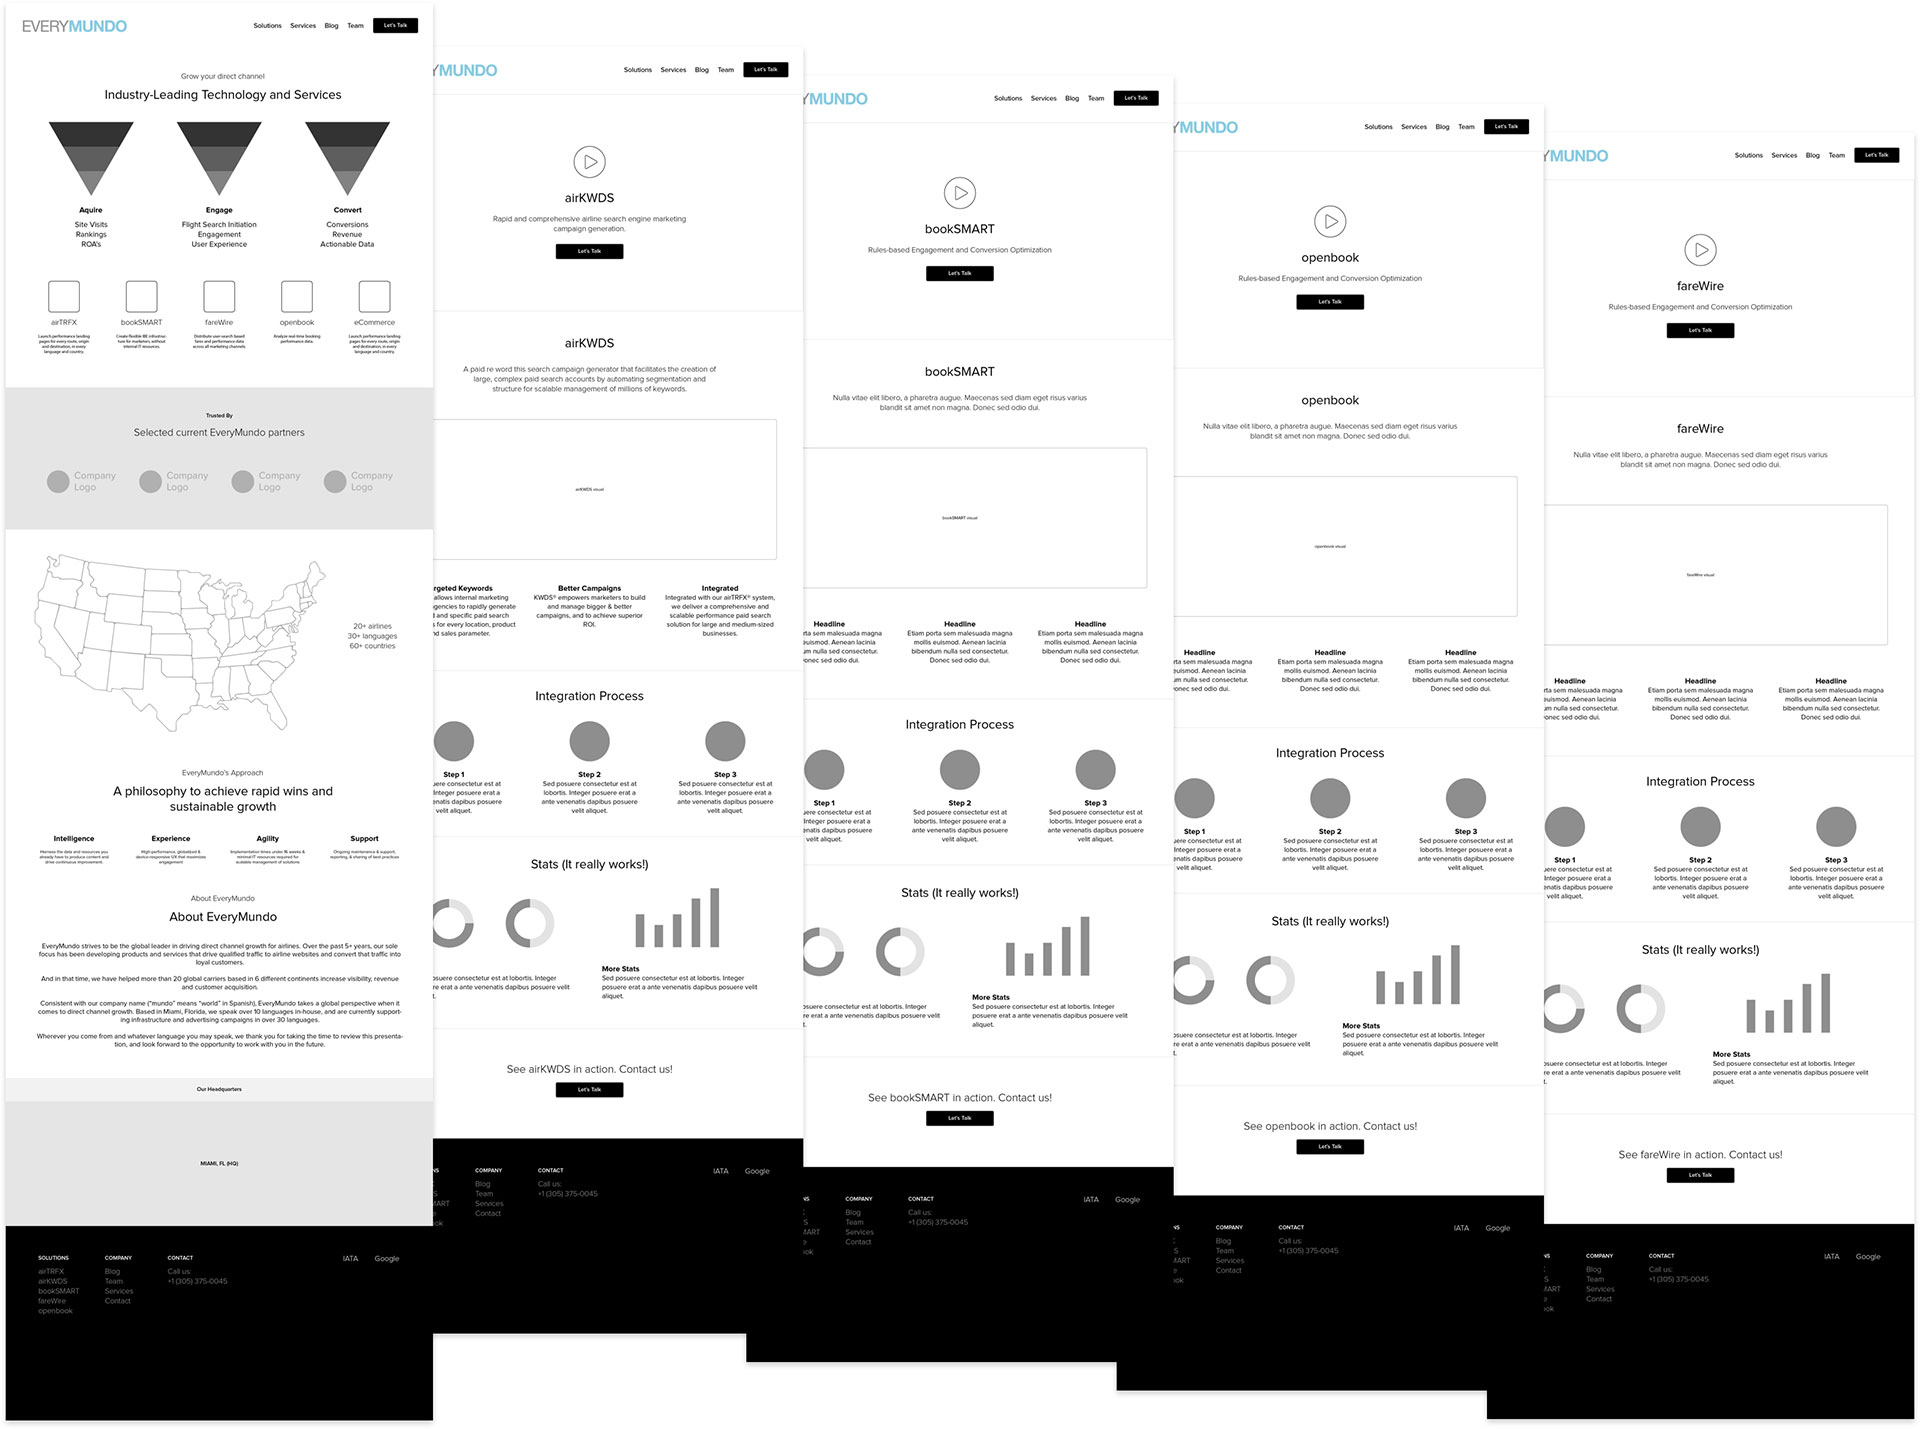 Wireframes conveying the user experience of EveryMundo